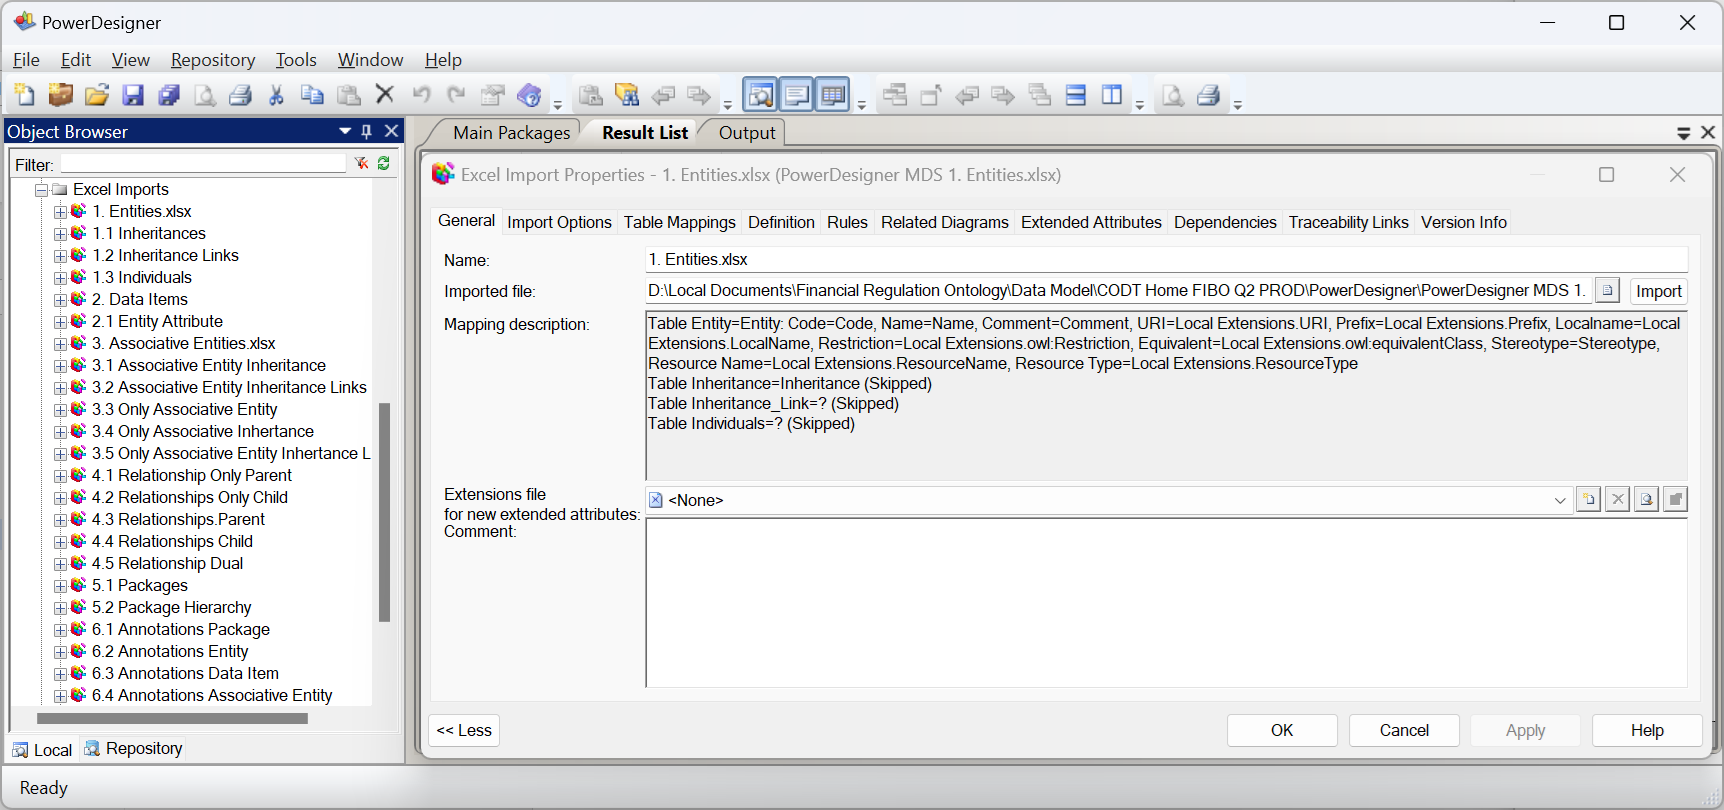 FIG 12 is a screenshot of the PowerDesigner data modeling tool.